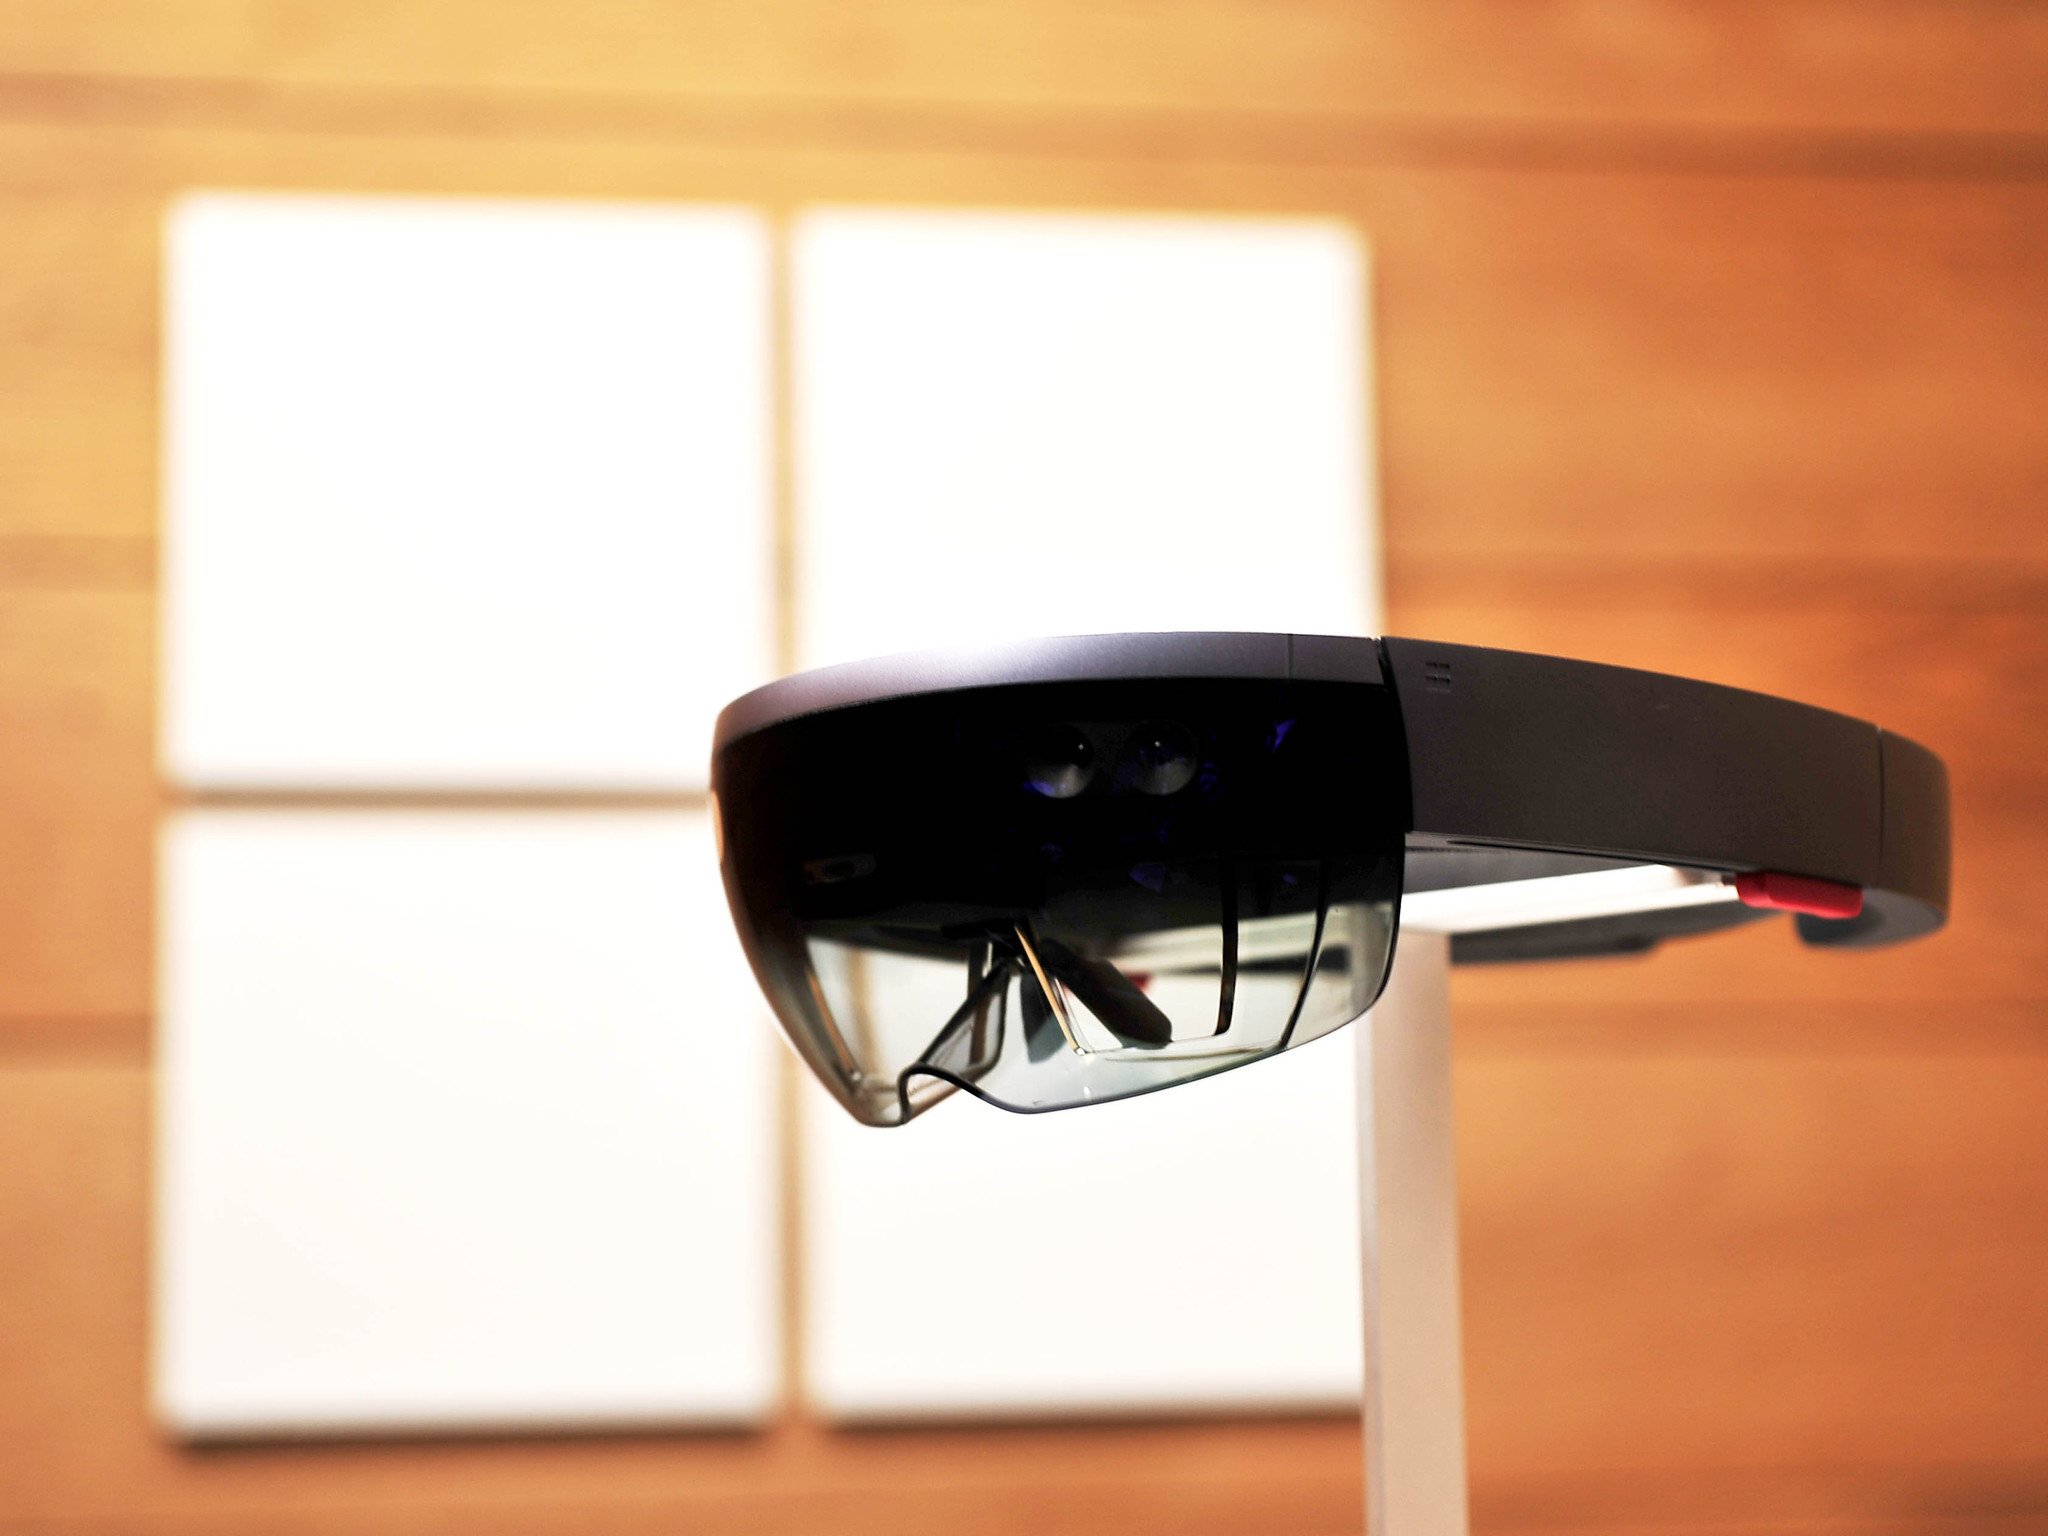 Microsoft's HoloLens AI chip could make its way to other devices